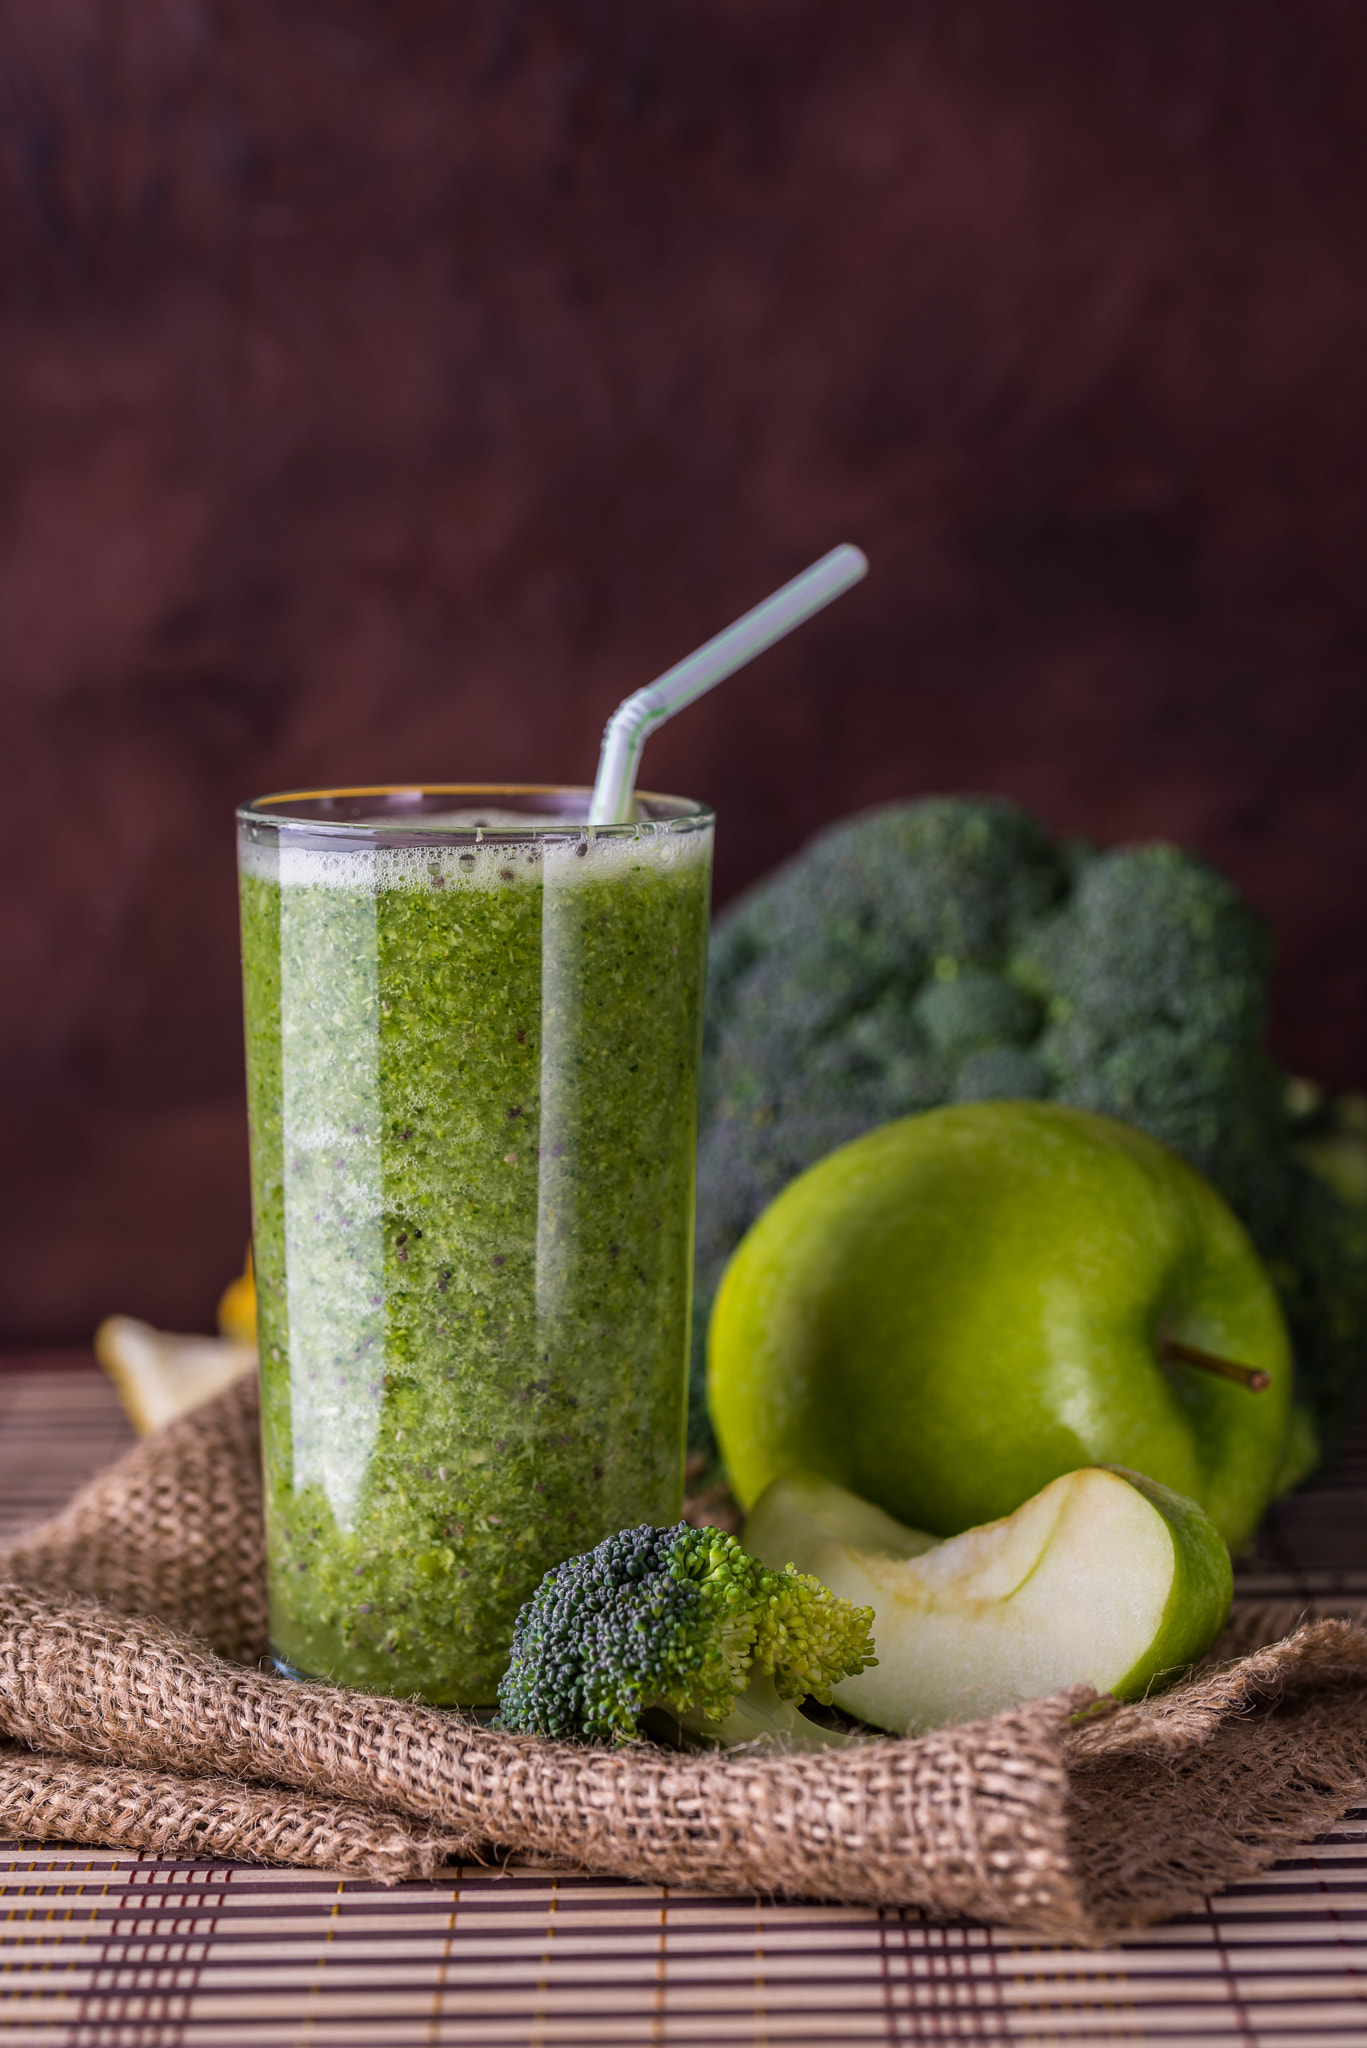 Nikon D610 + Tamron SP 90mm F2.8 Di VC USD 1:1 Macro (F004) sample photo. Broccoli smoothie in glass bowl on wooden background with lemon photography